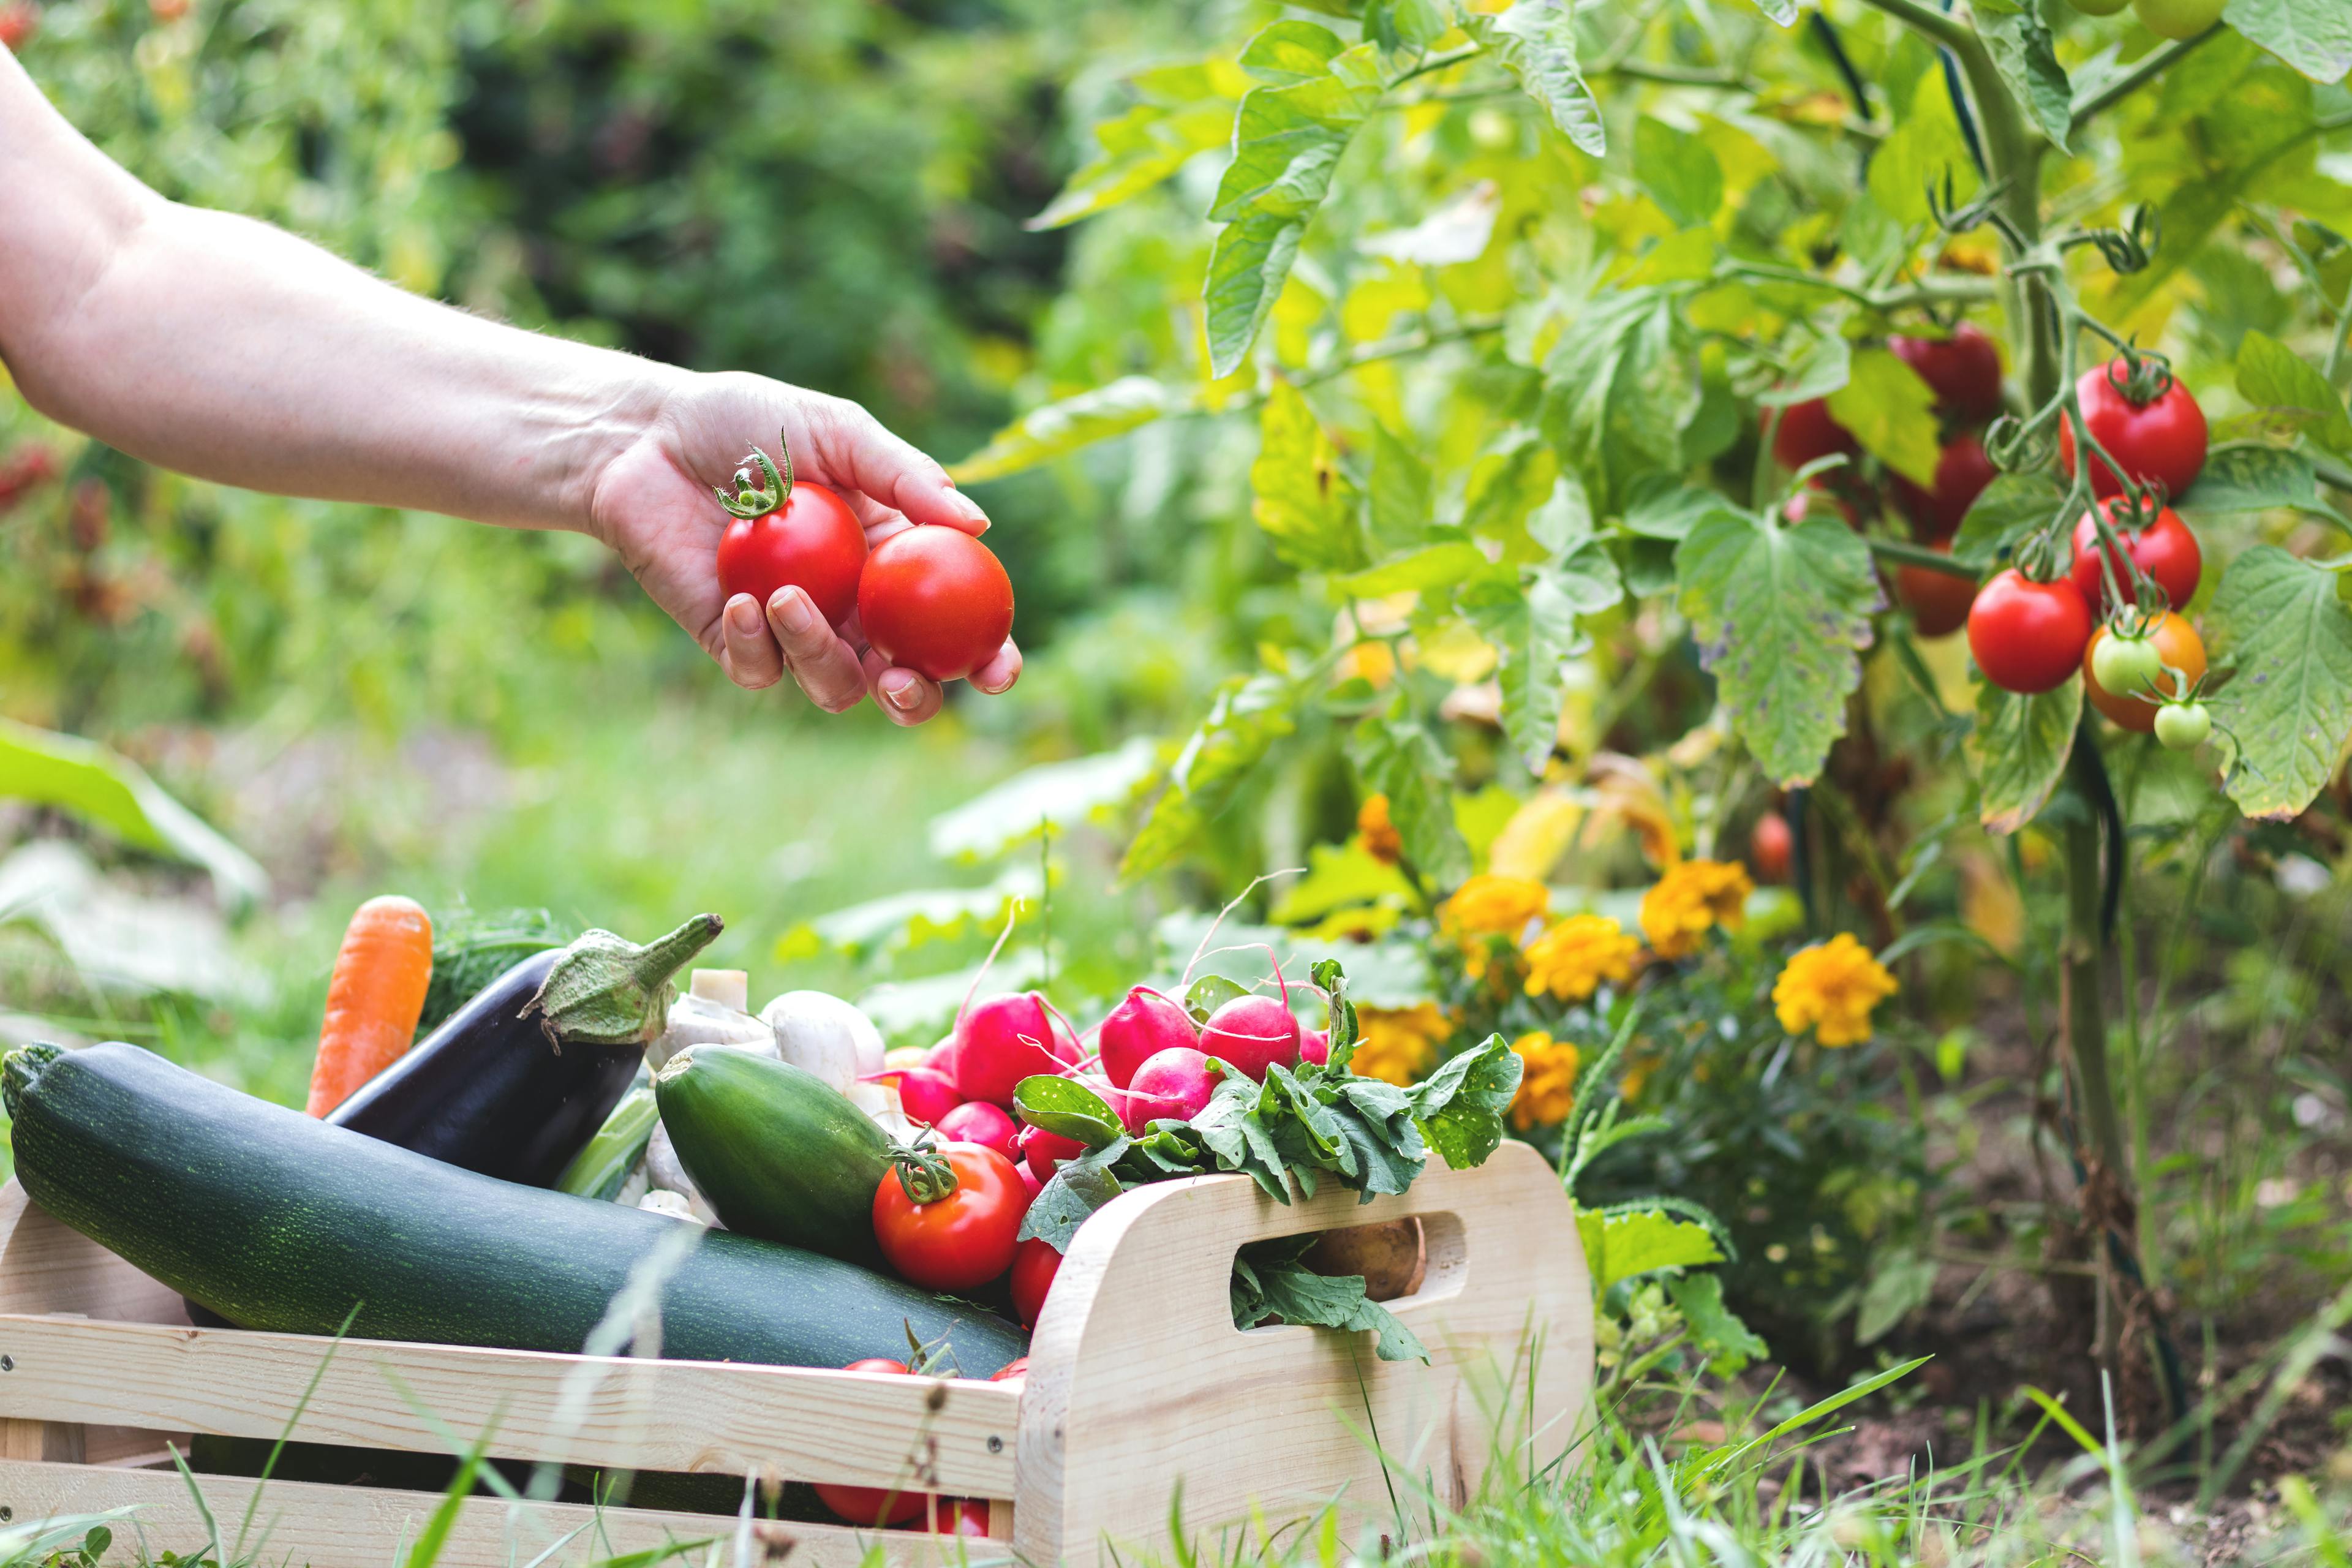 A wooden basket holds vegetables harvested from the vegetable garden and a hand is holding two tomatoes cut fresh from the vine